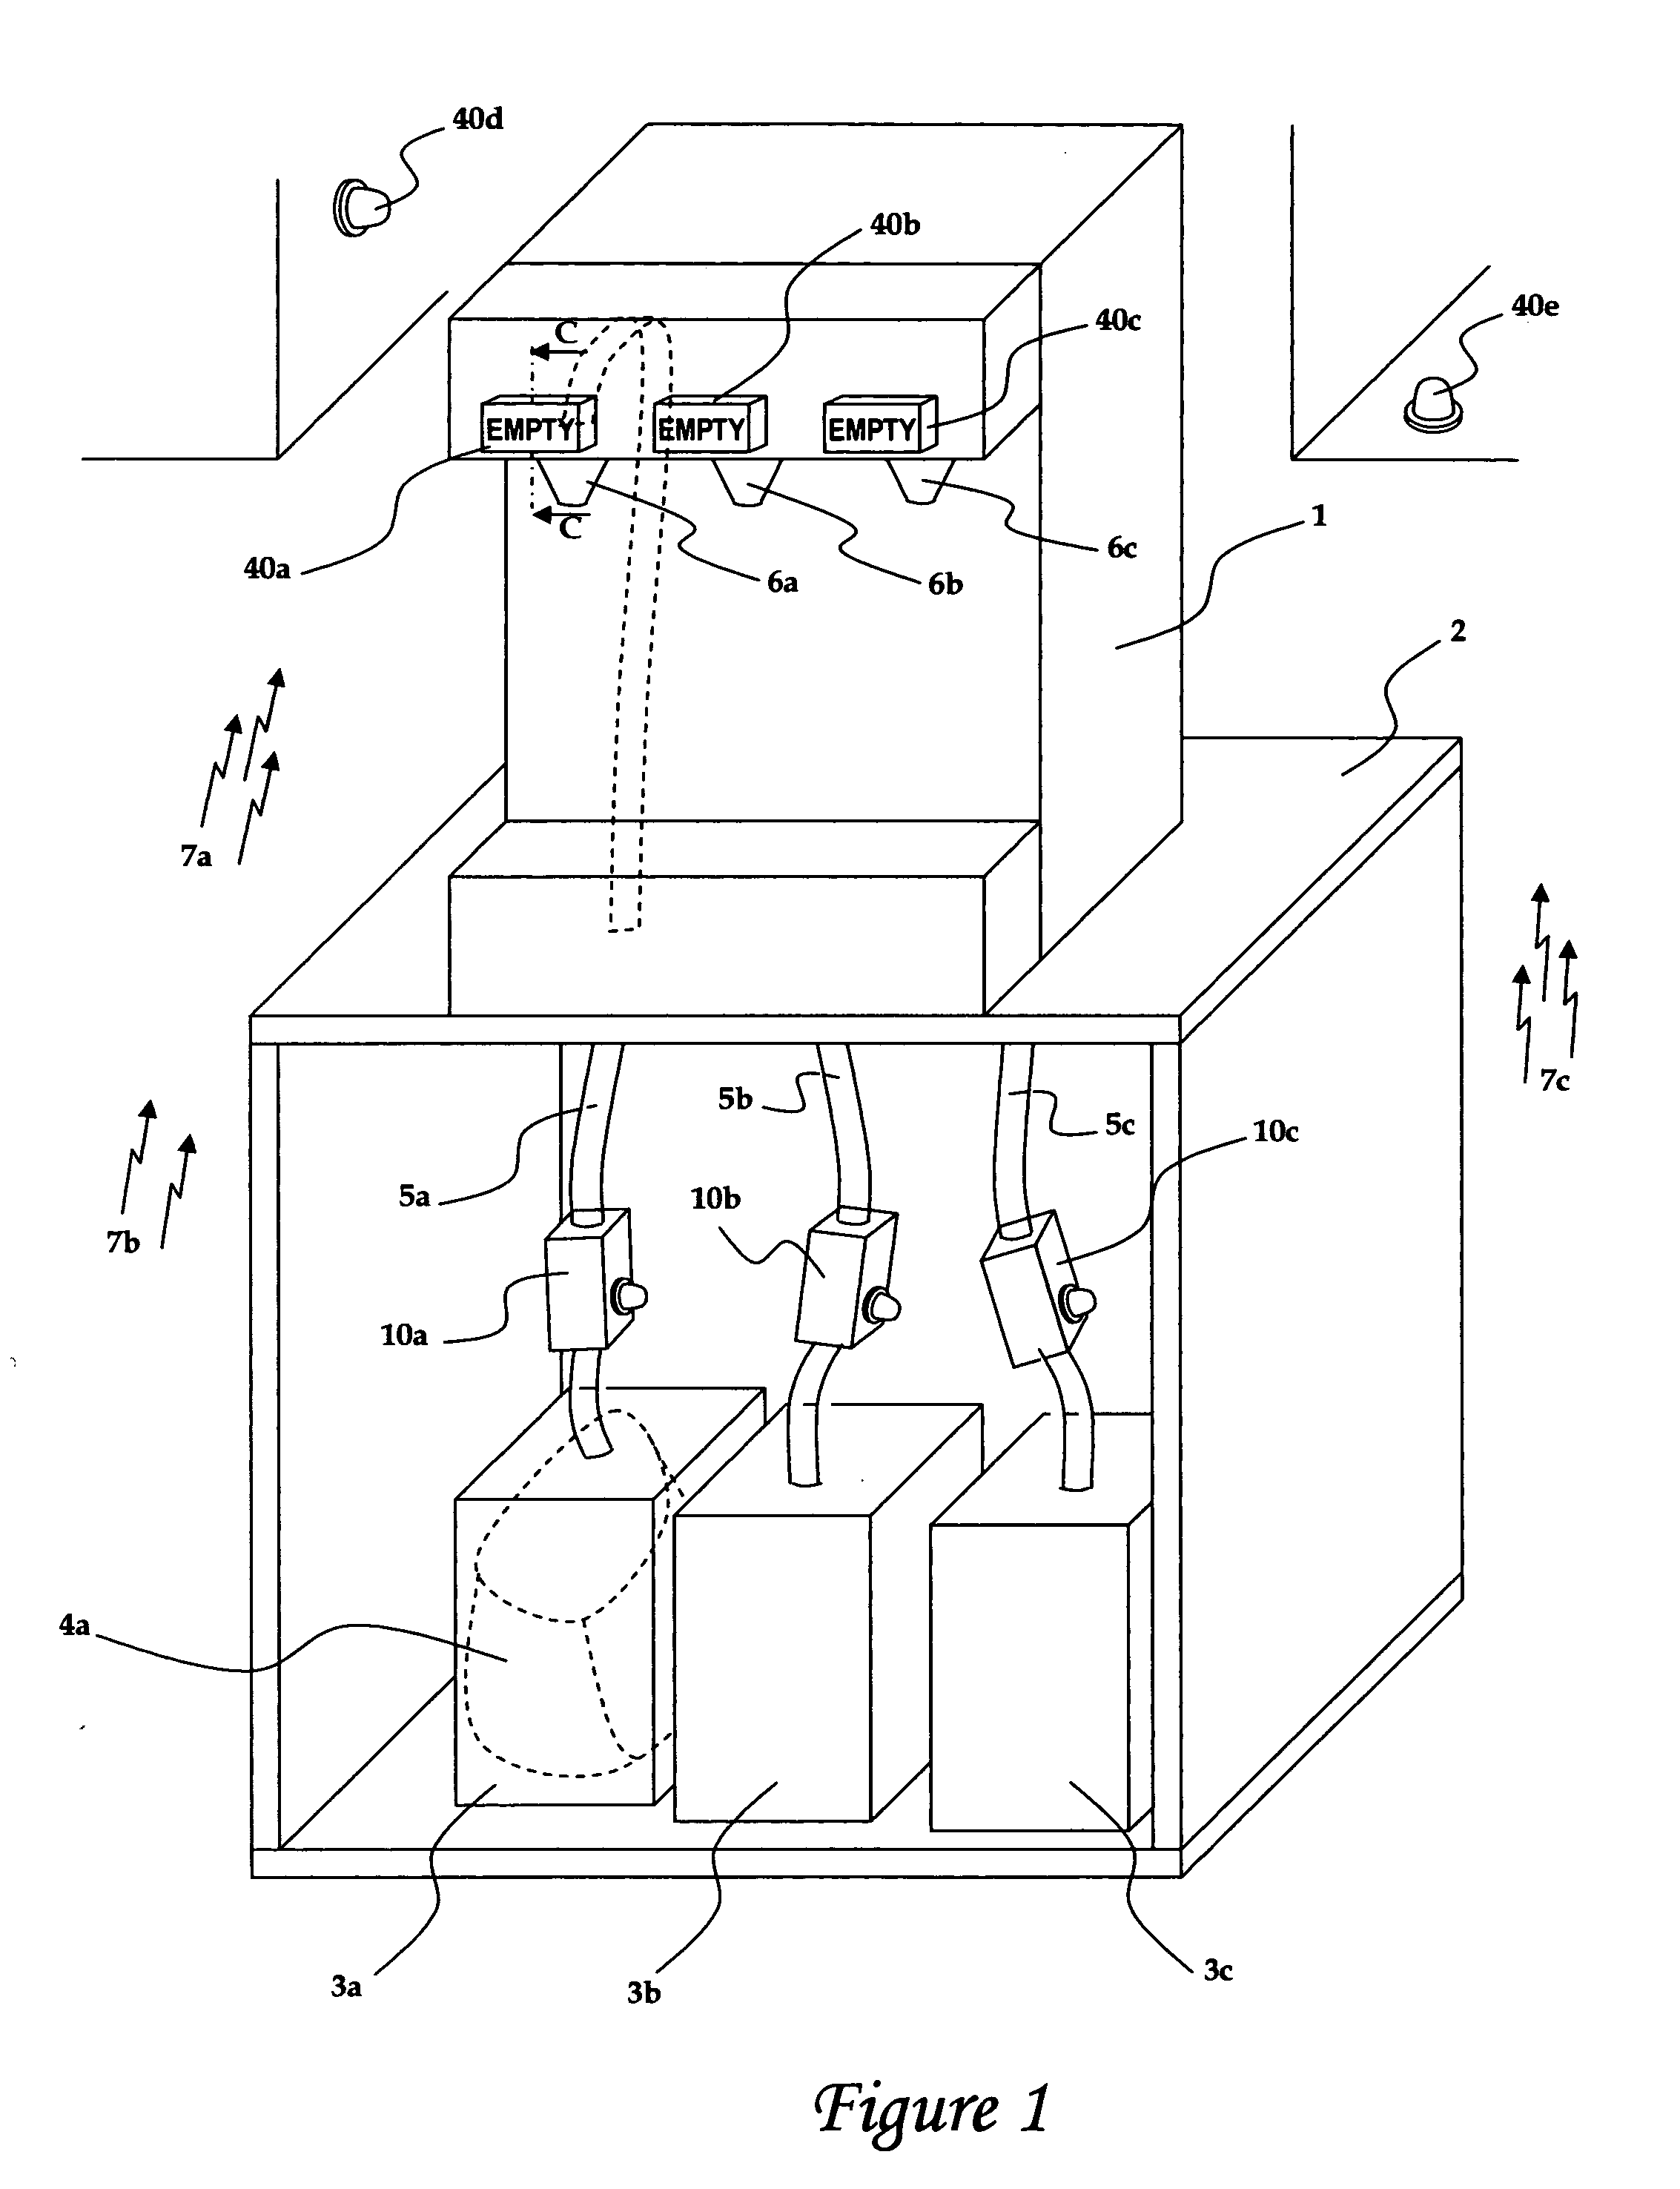 Air-in-line detector with warning device